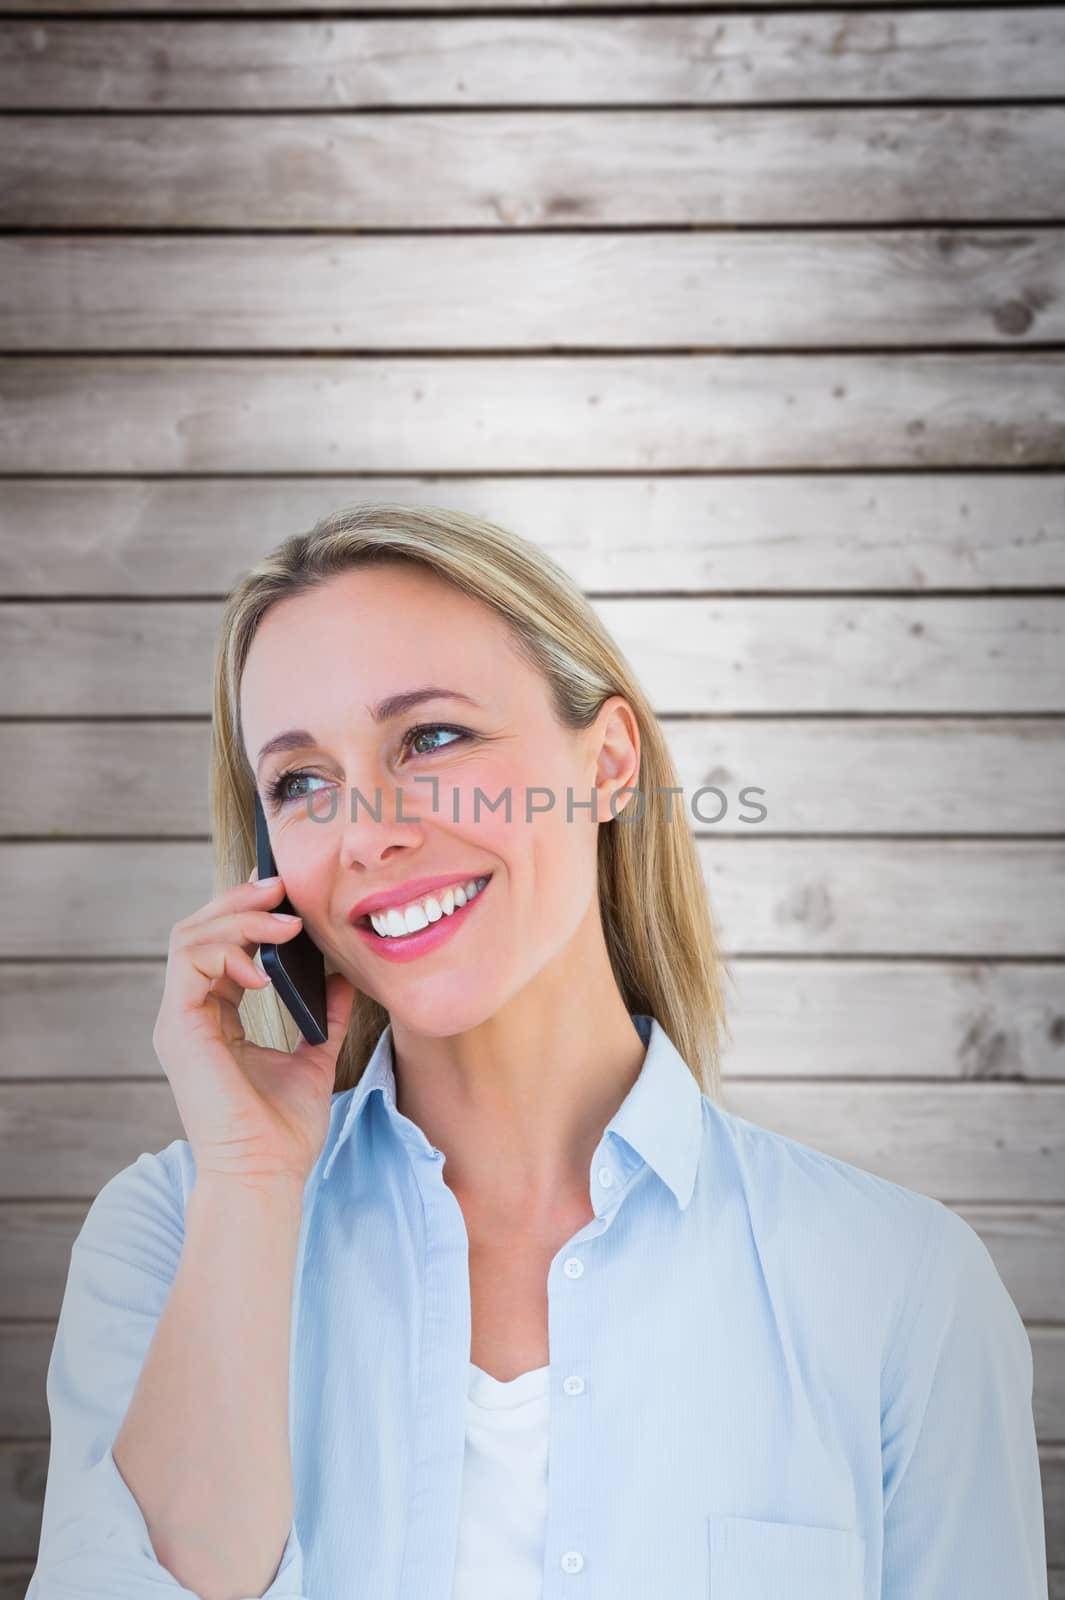 Smiling blonde on the phone standing against wooden planks